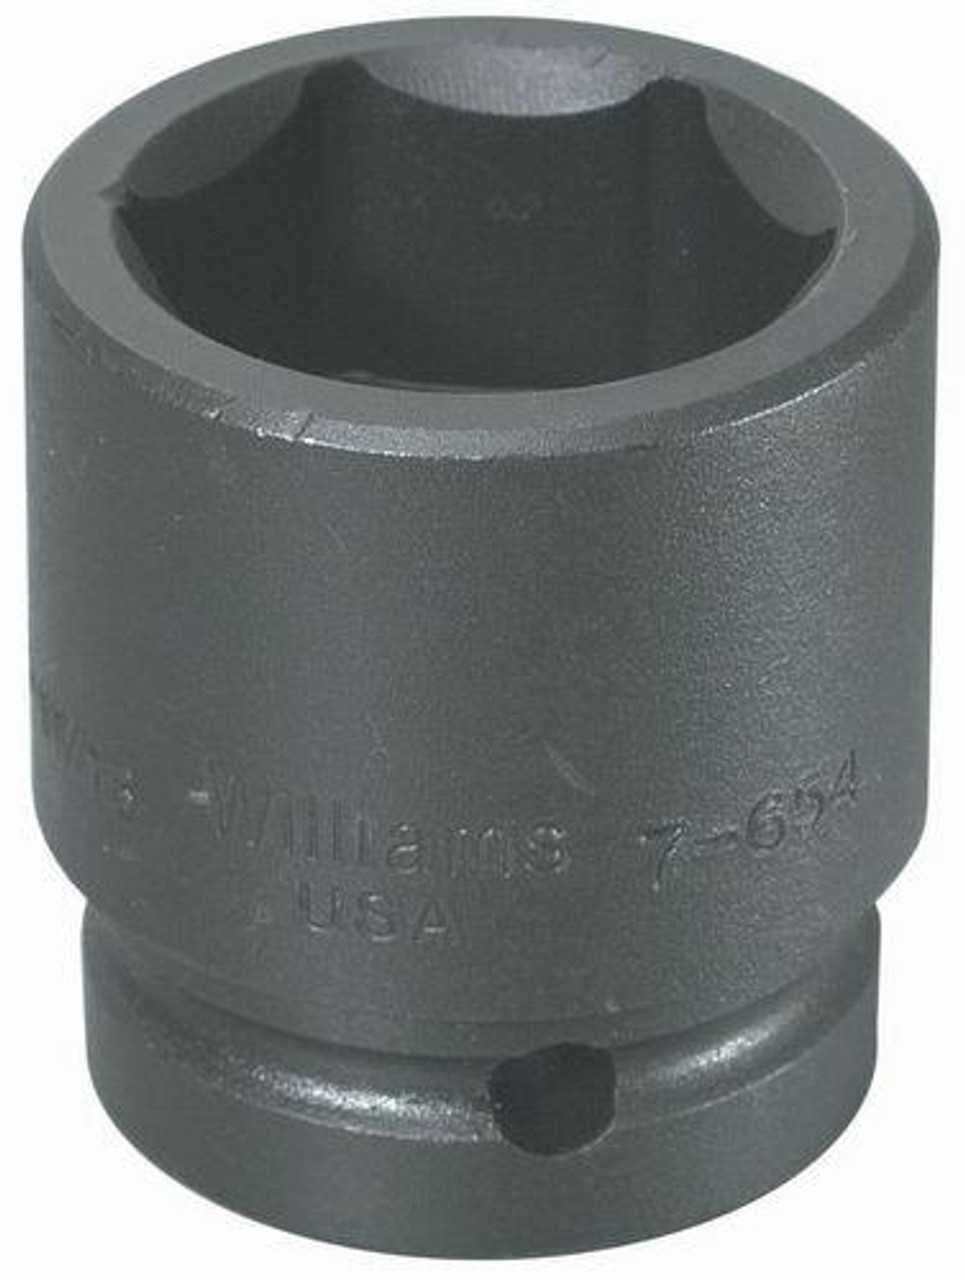 Williams Made In USA 1 5/8" Williams 1" Dr Shallow Impact Socket 6 Pt - 7-652 